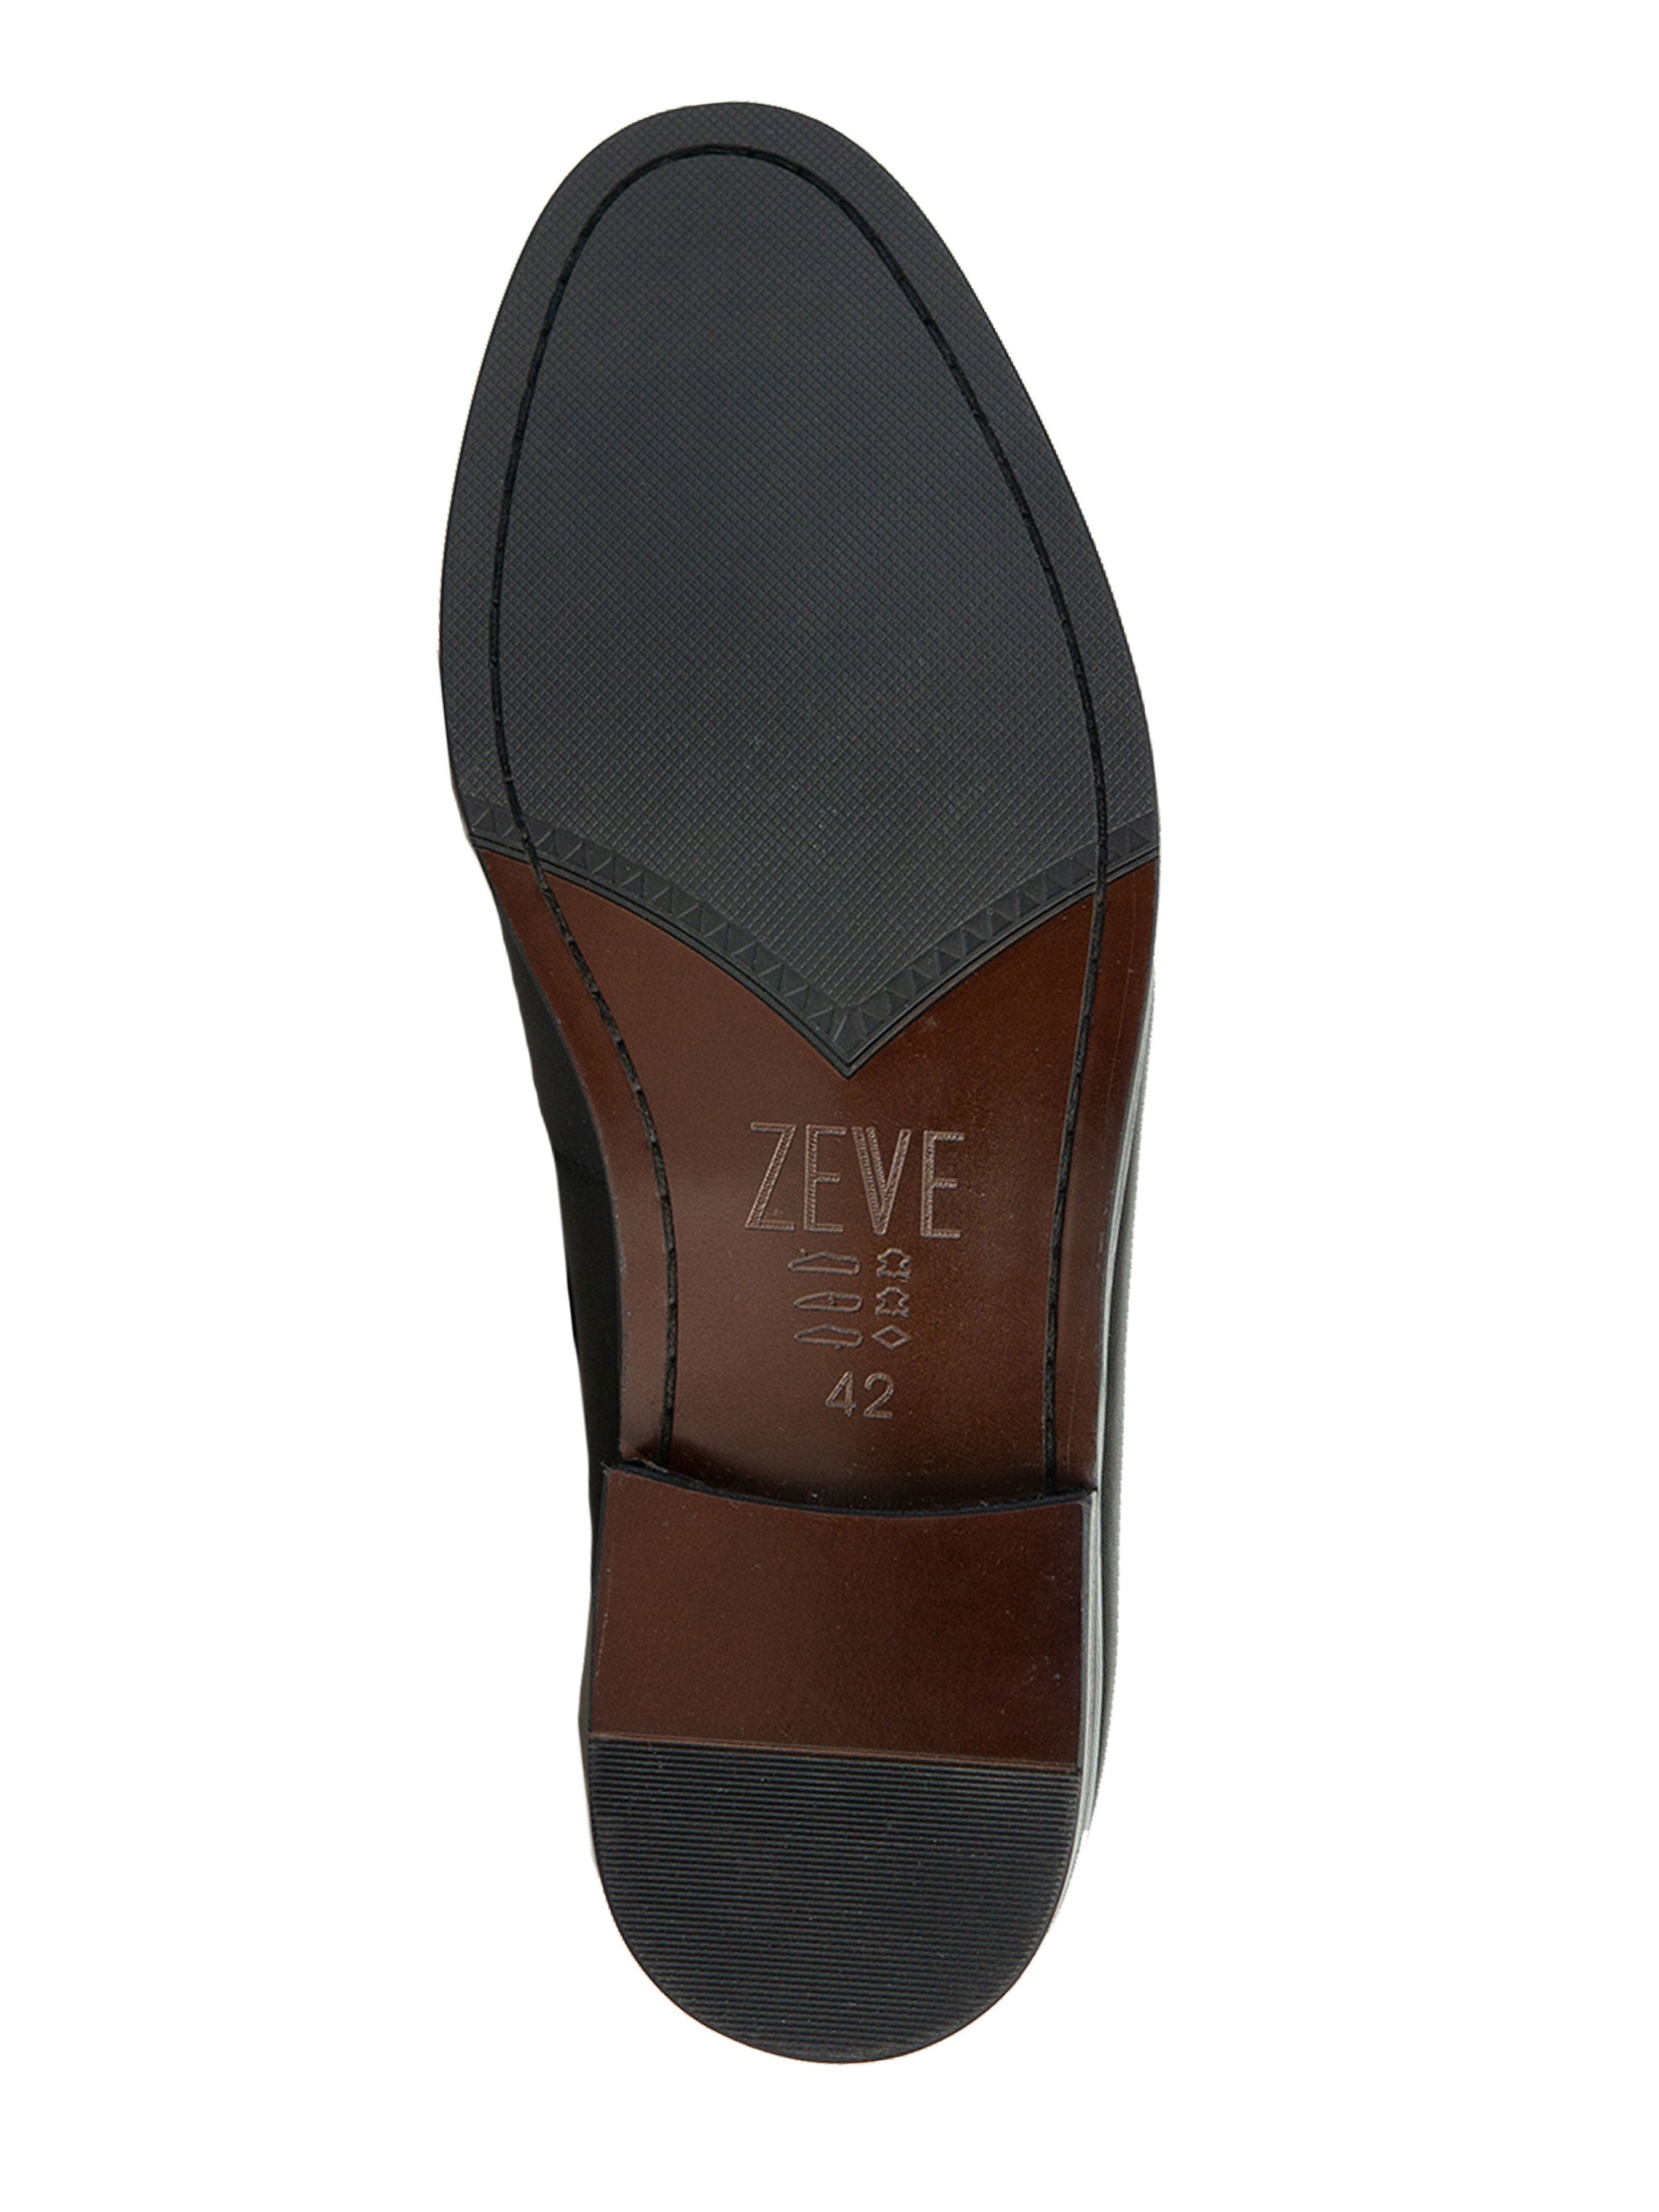 Penny Moccasin Loafer - Cognac Tan (Hand Painted Patina) - Zeve Shoes